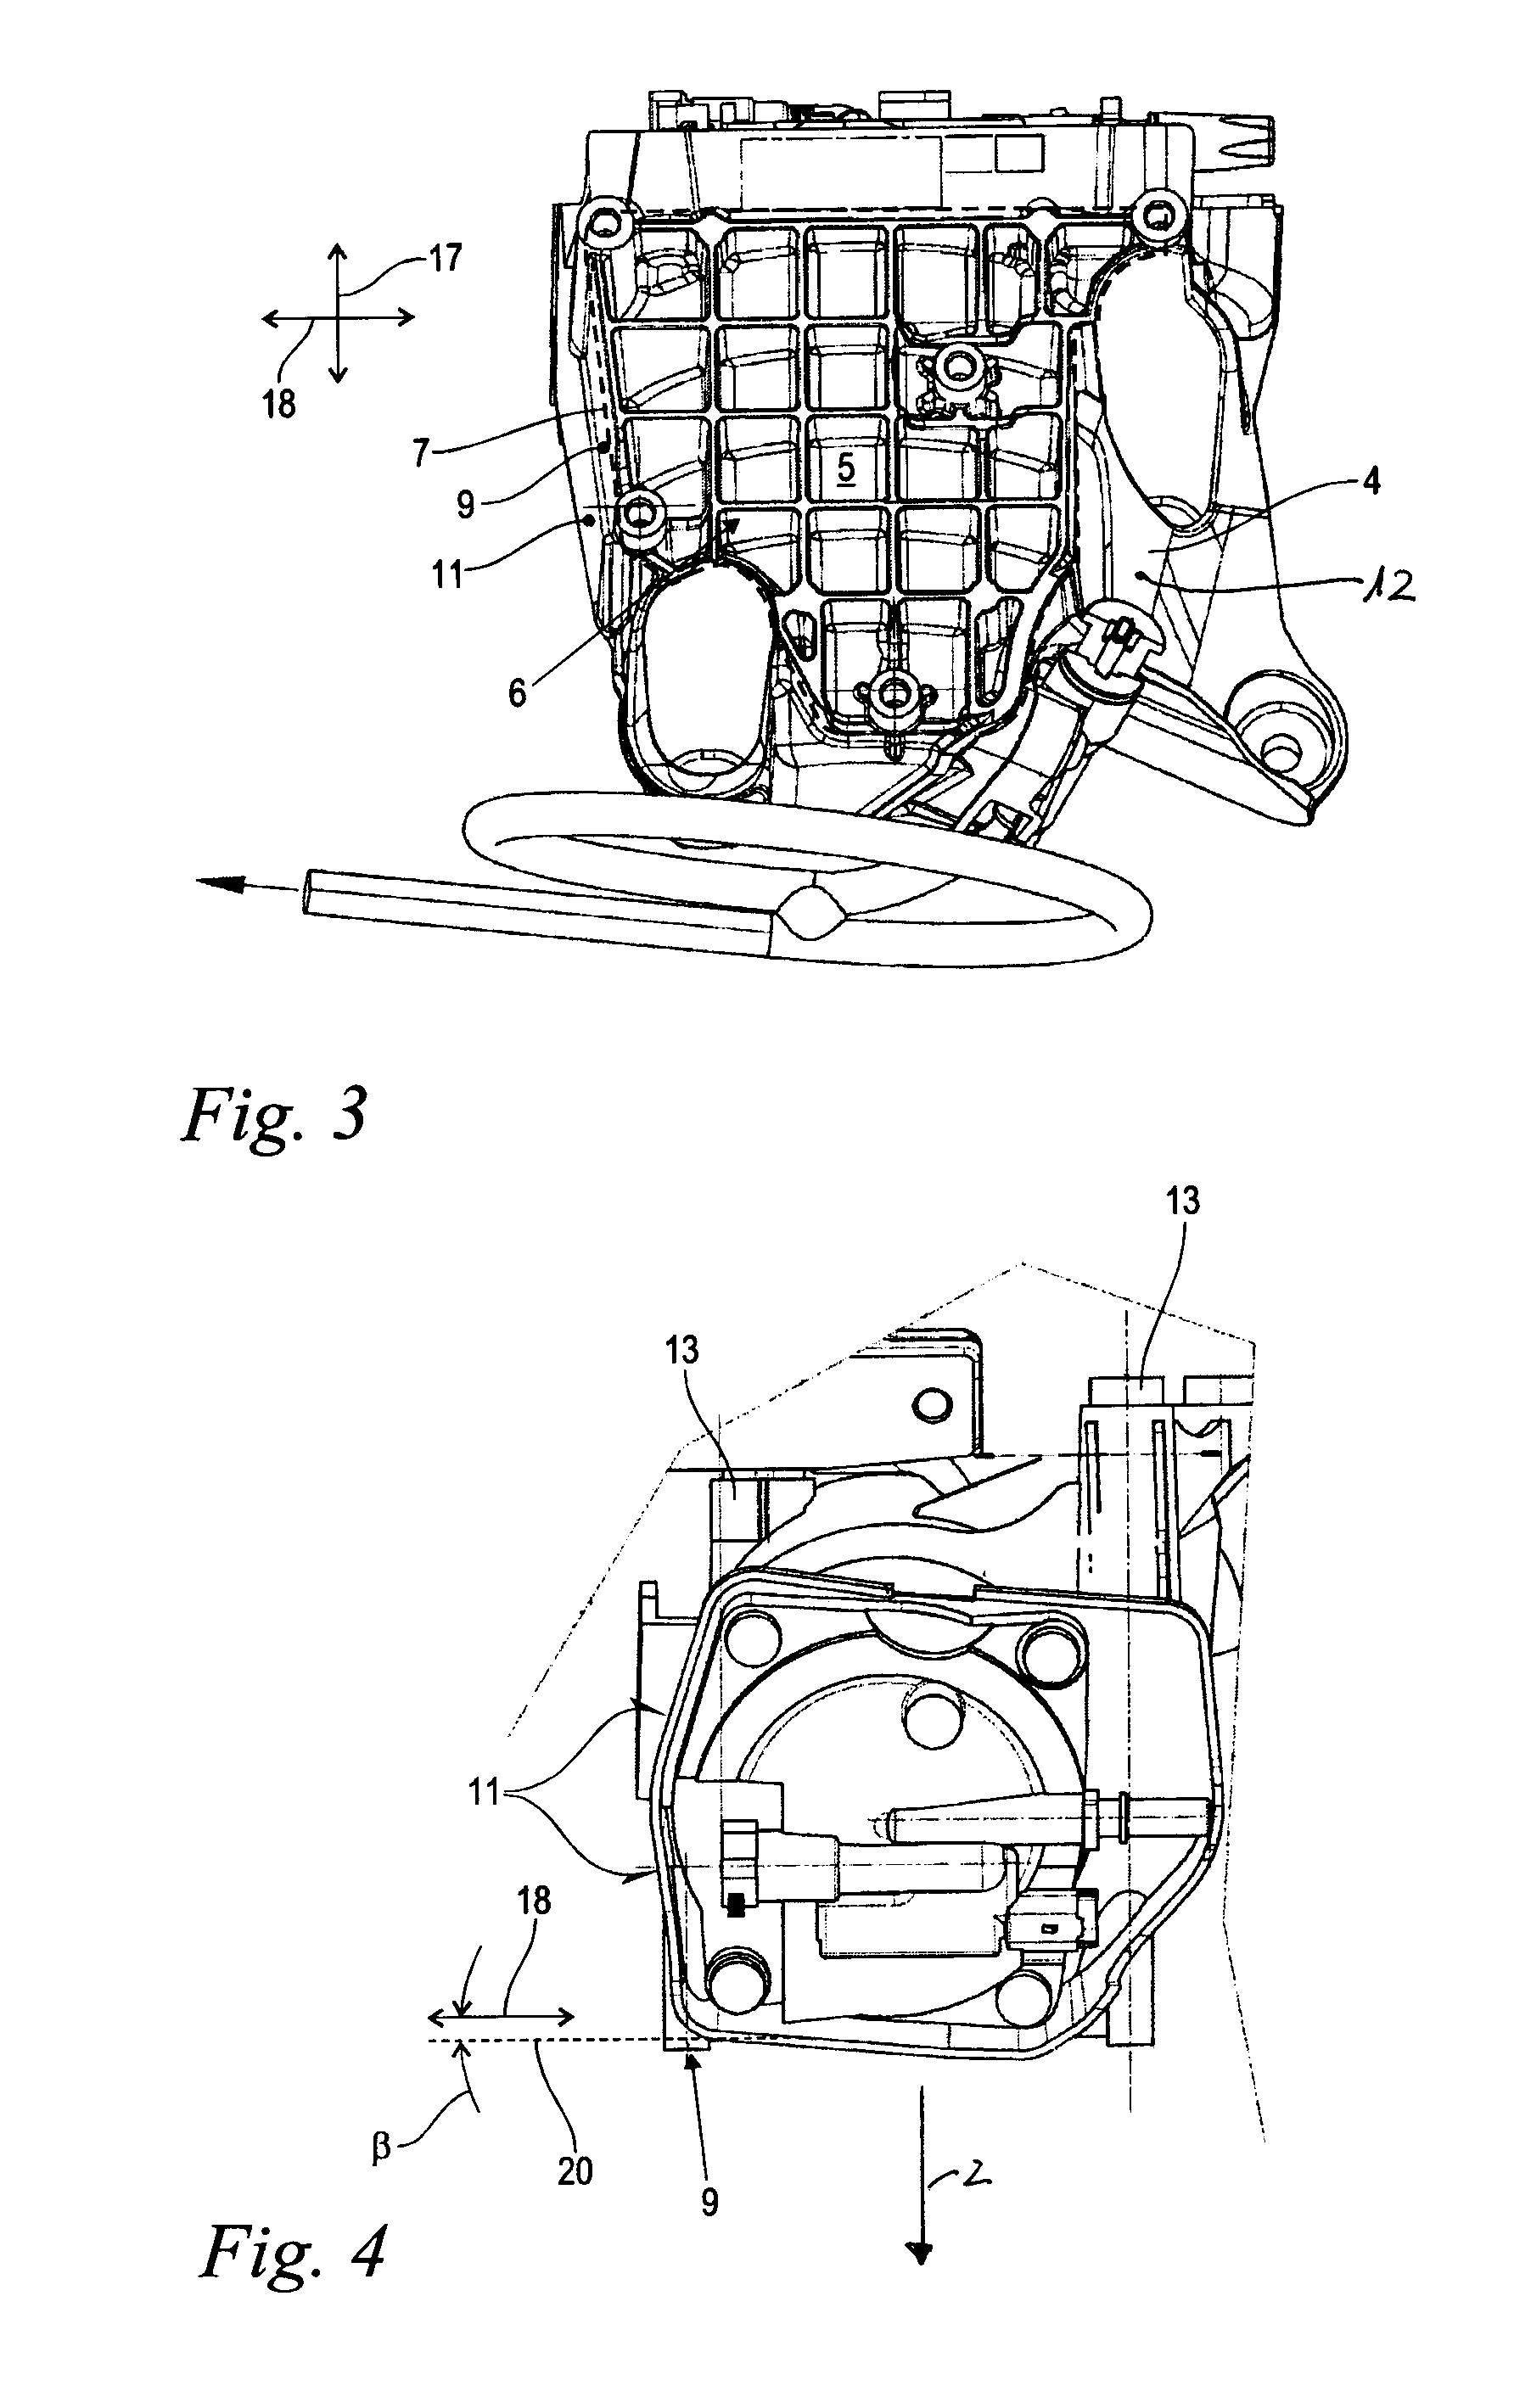 Fuel filter of a motor vehicle